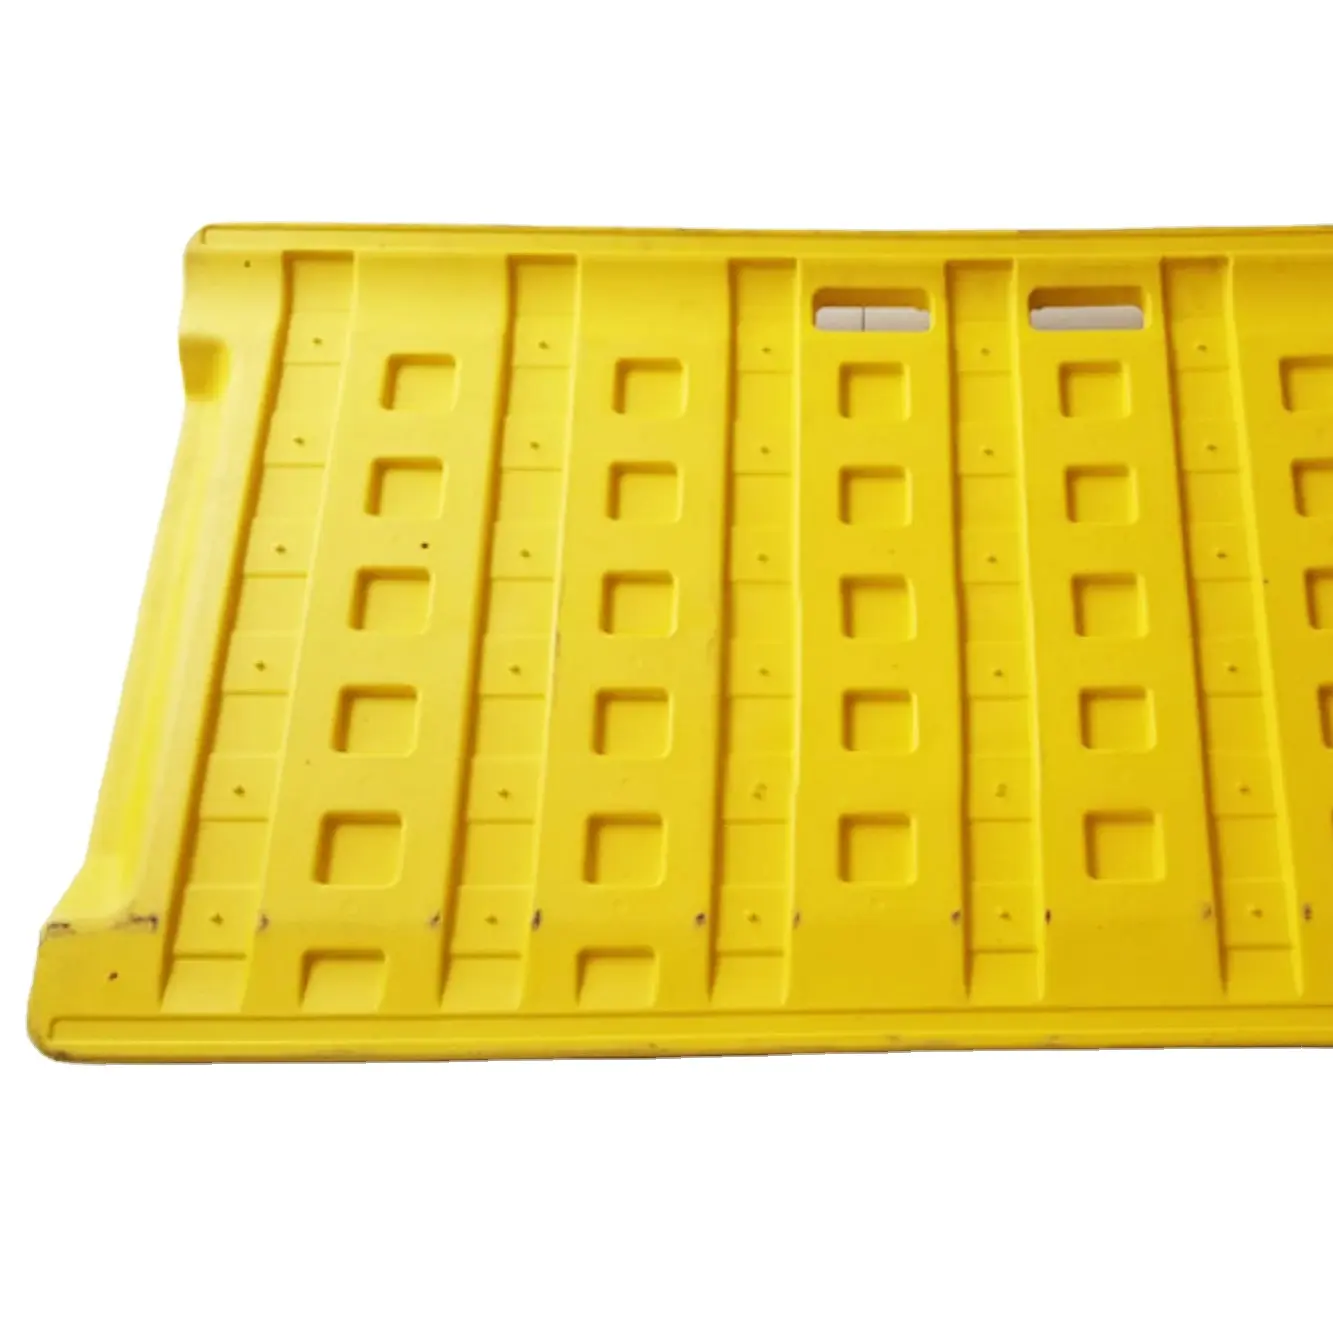 Yellow High Quality Cheap Removable Driveway Portable Curb Kerb Wheelchair Ramp For Home